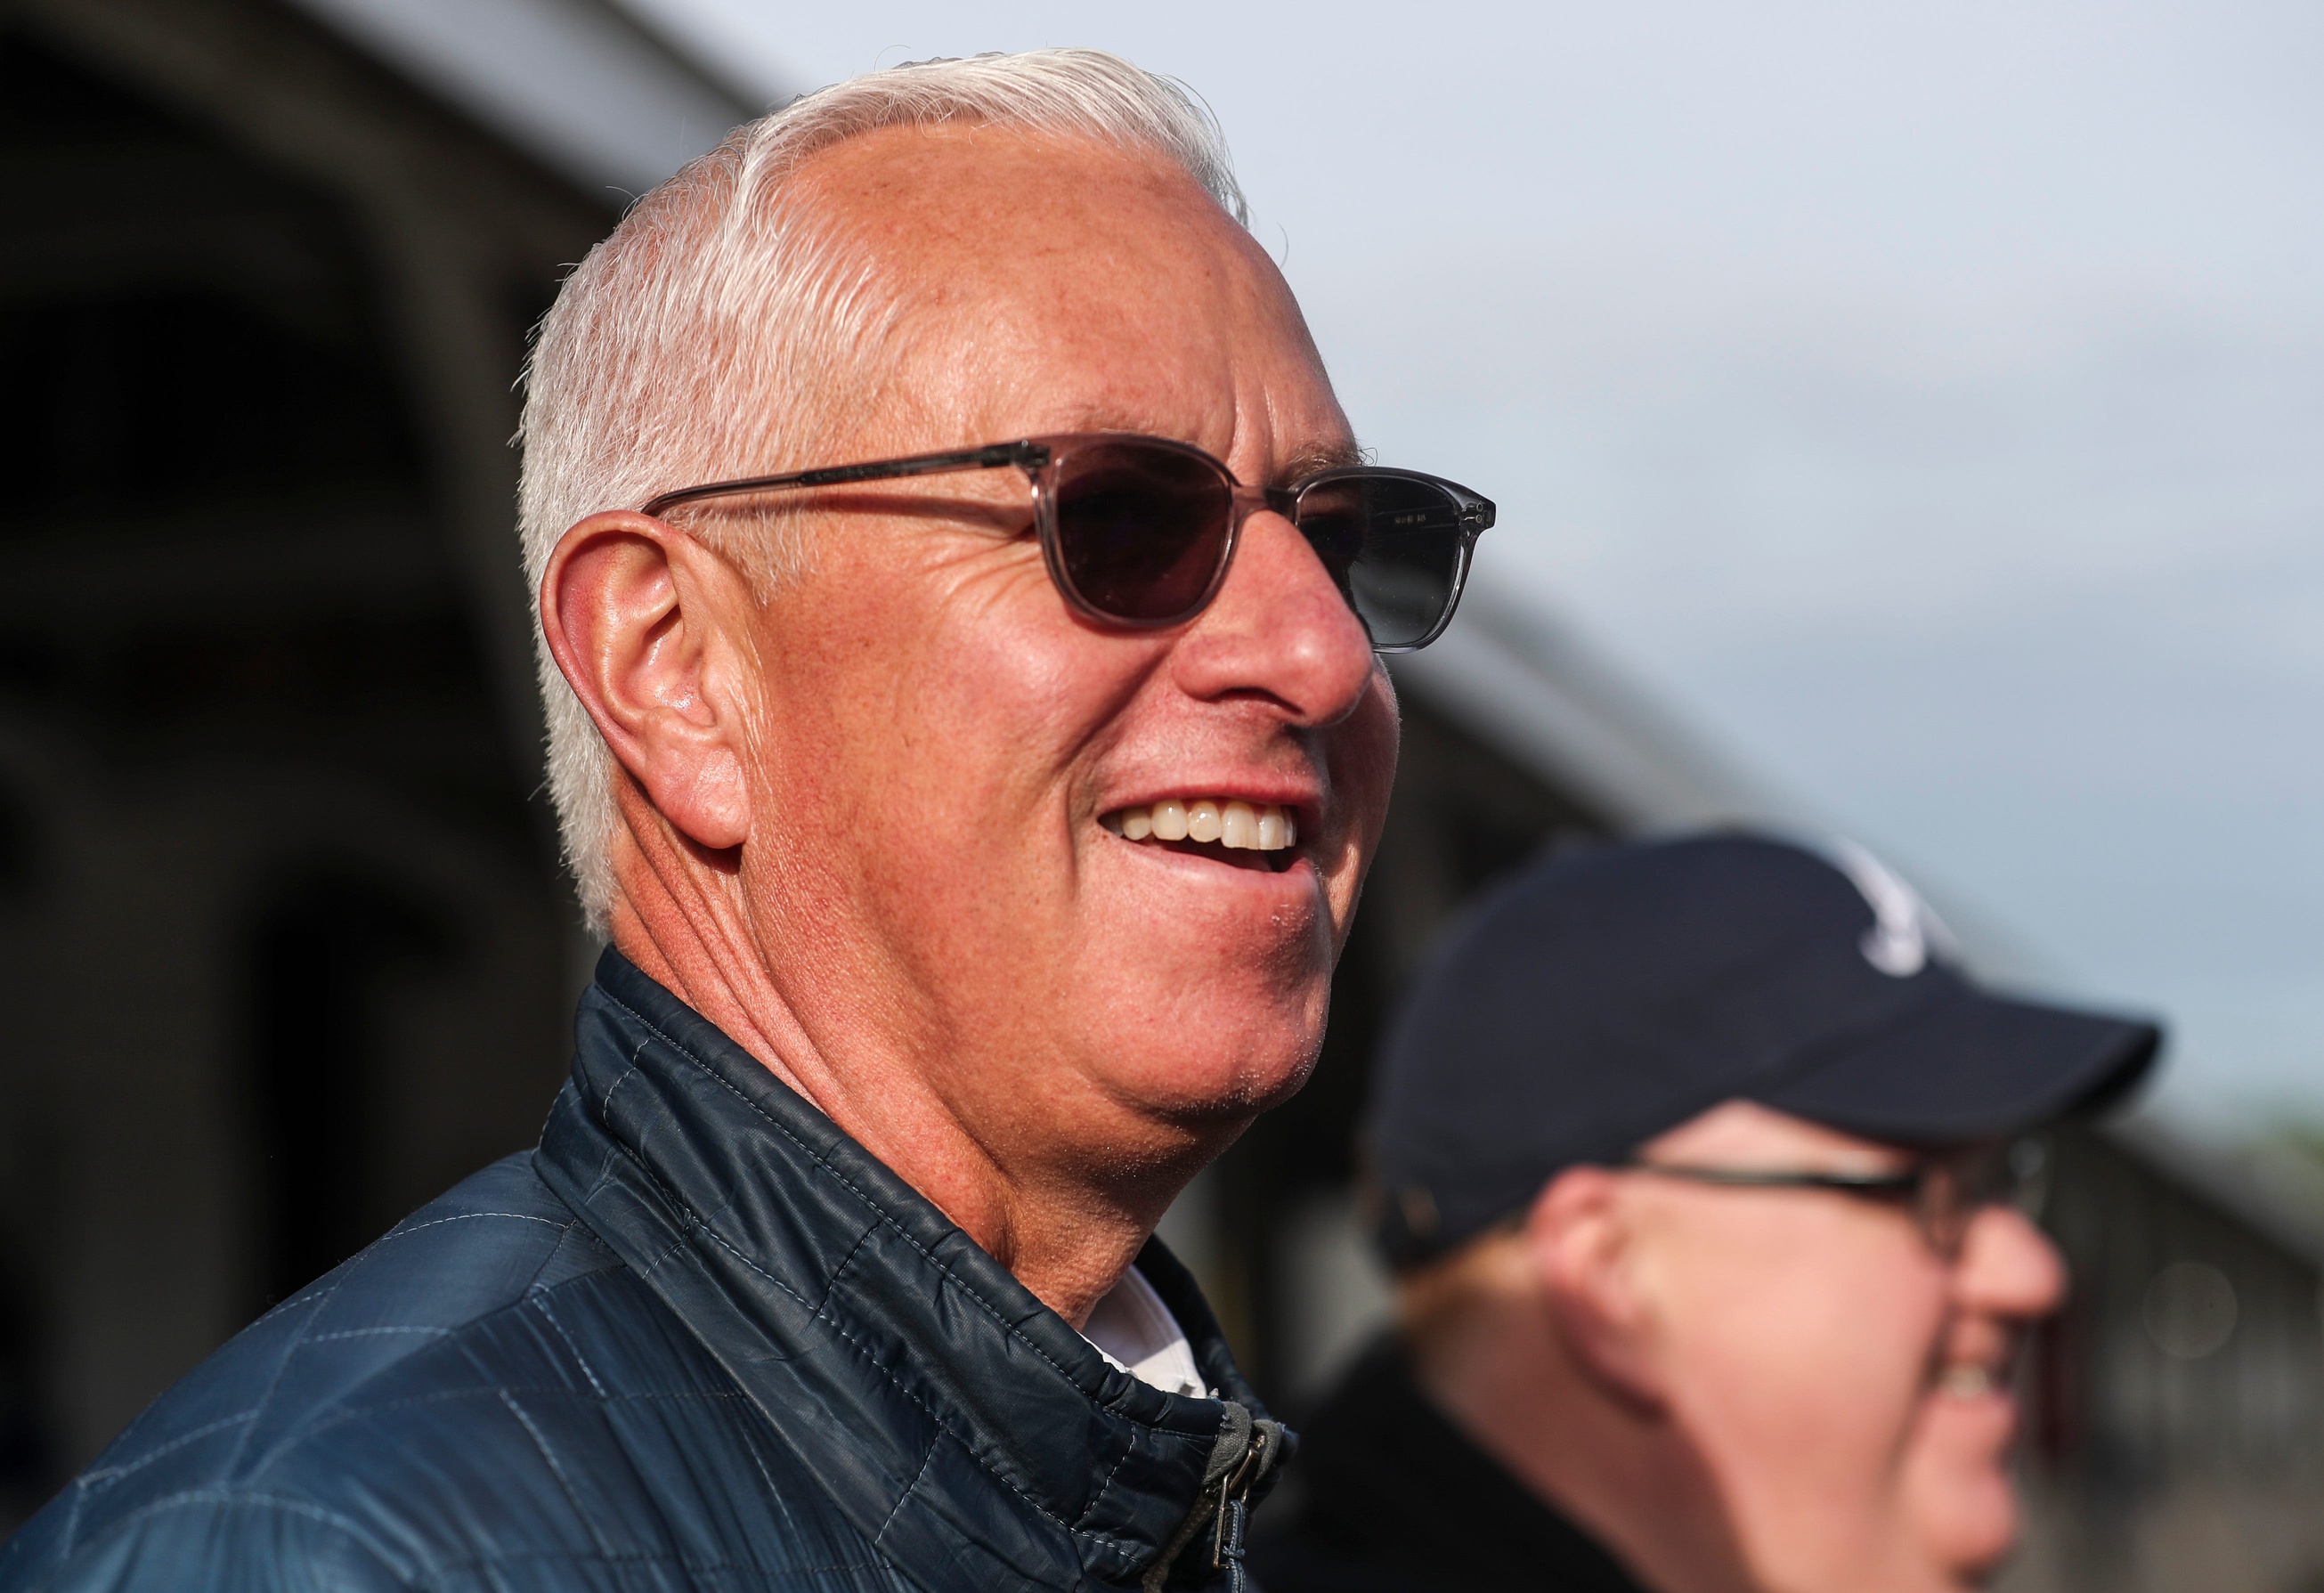 Handicapping the Kentucky Derby trainers Todd Pletcher